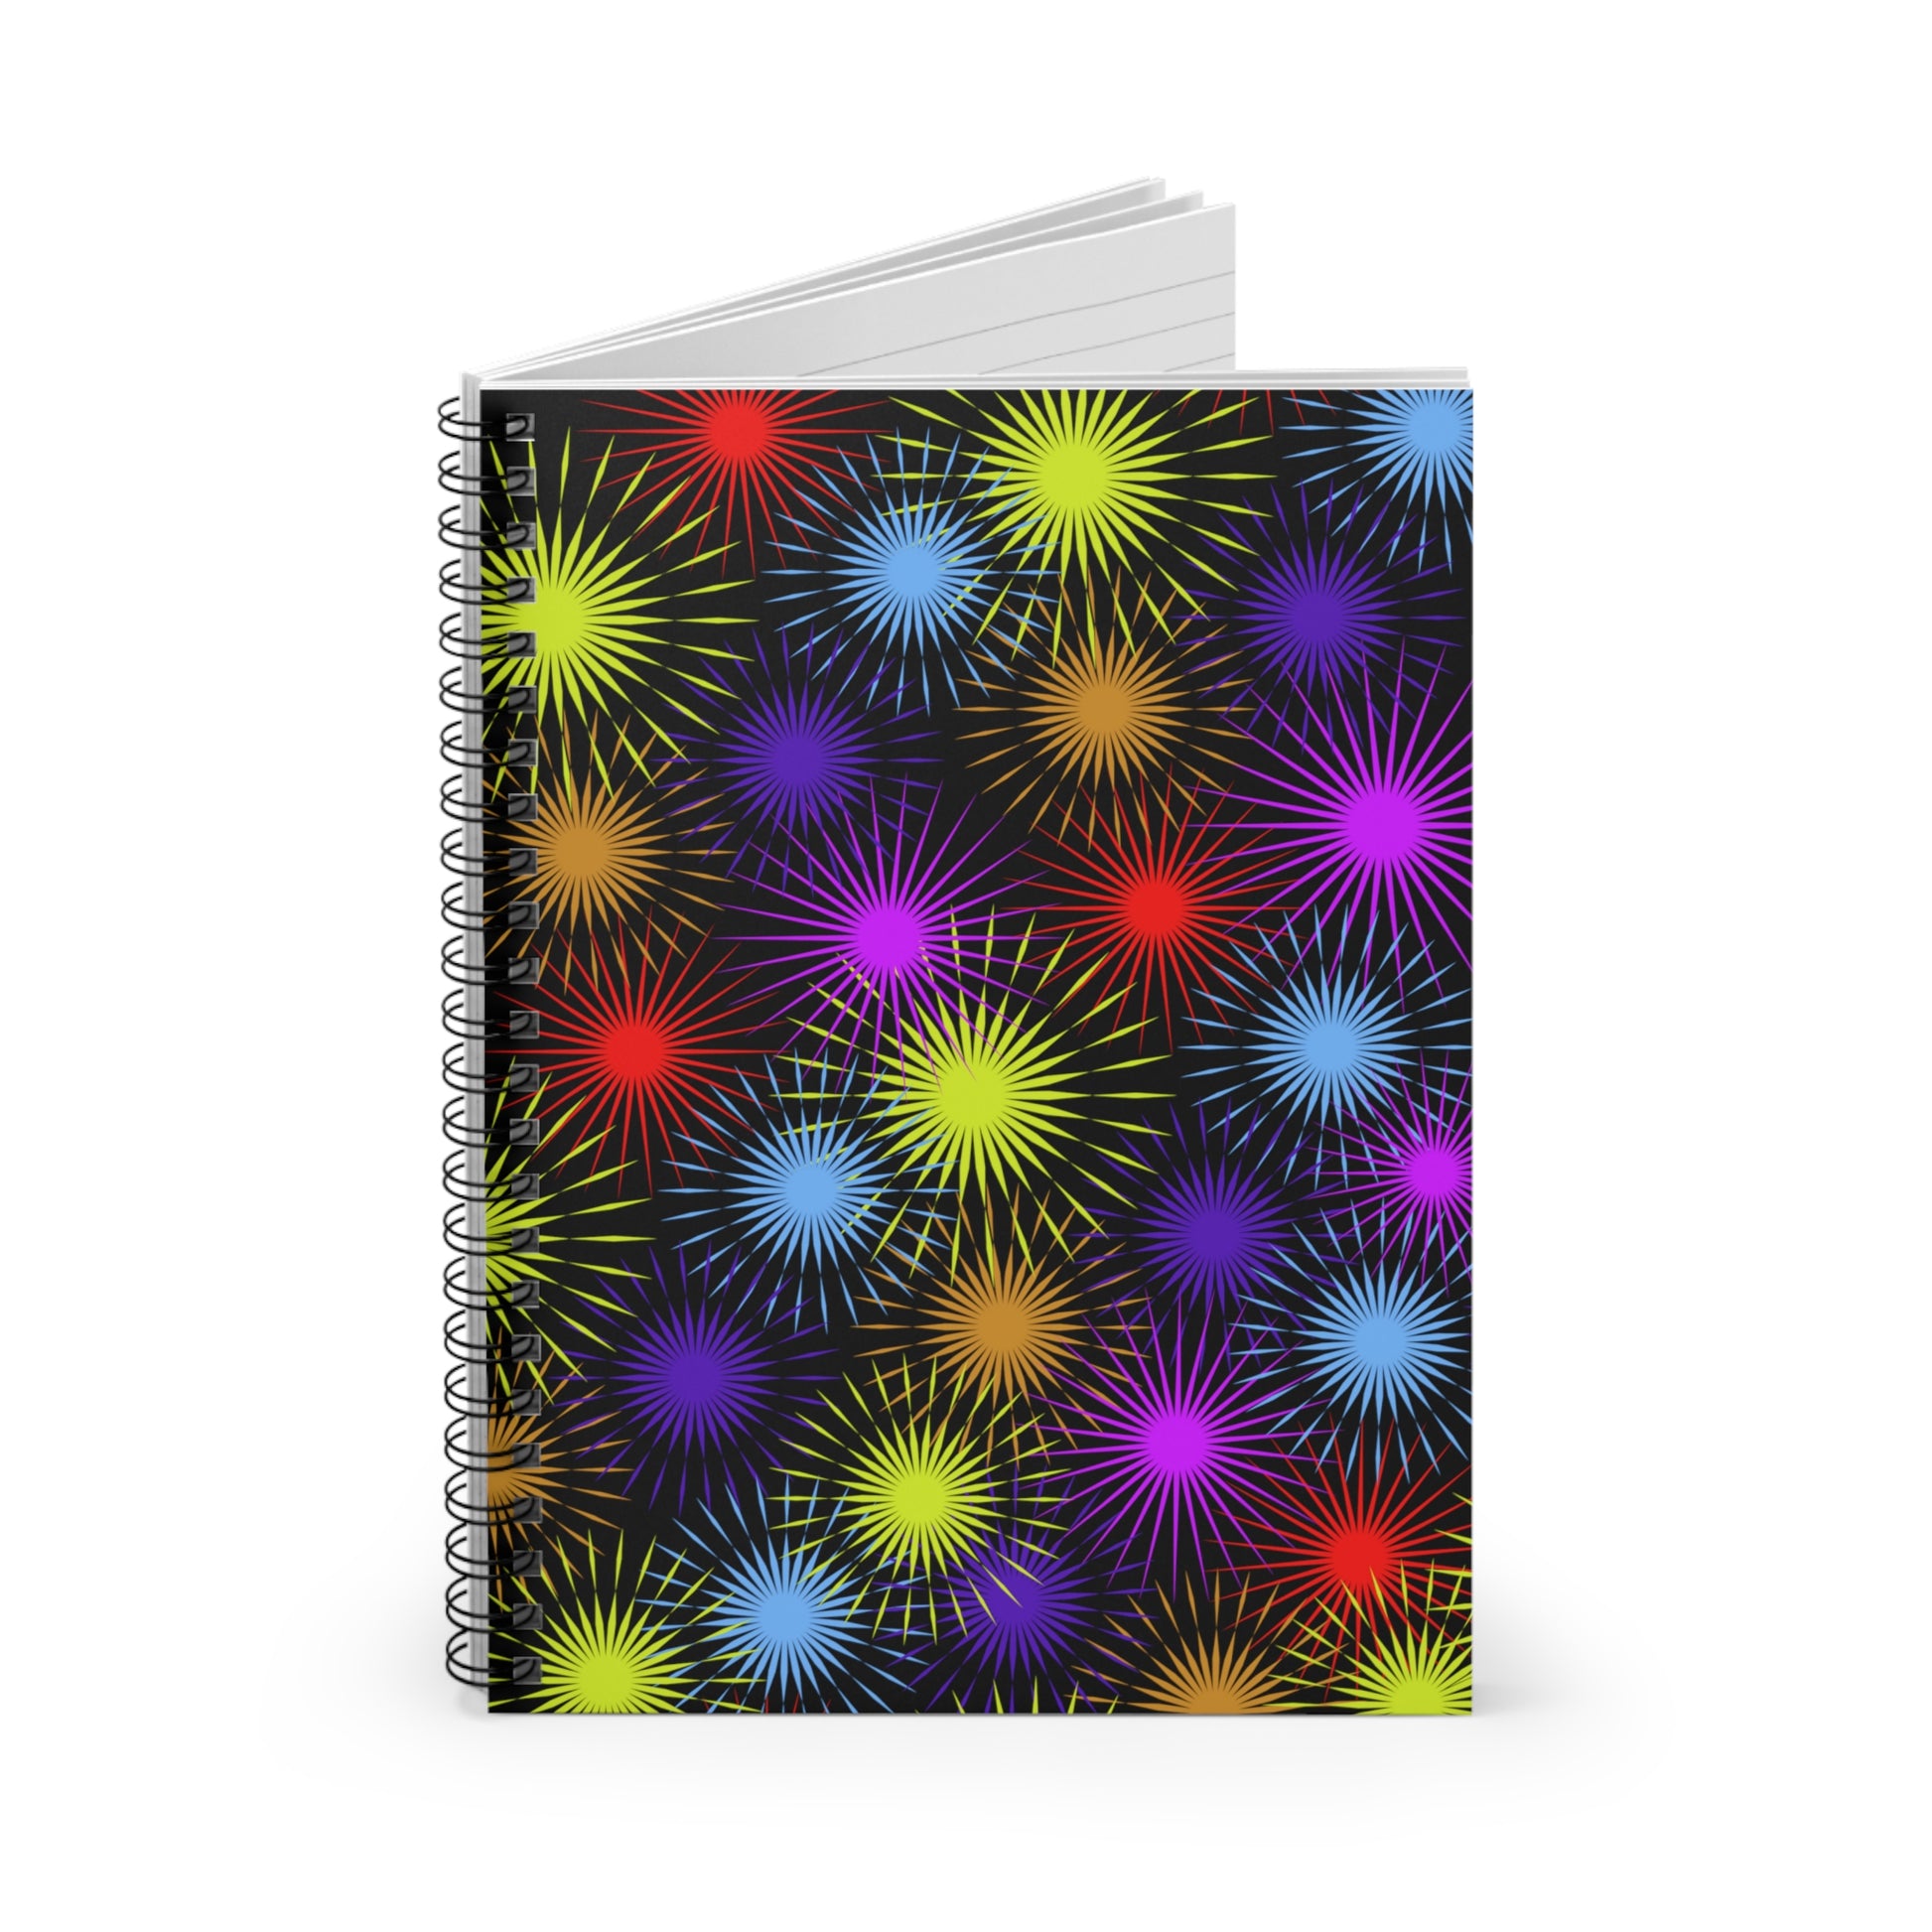 Starburst Fireworks: Spiral Notebook - Log Books - Journals - Diaries - and More Custom Printed by TheGlassyLass